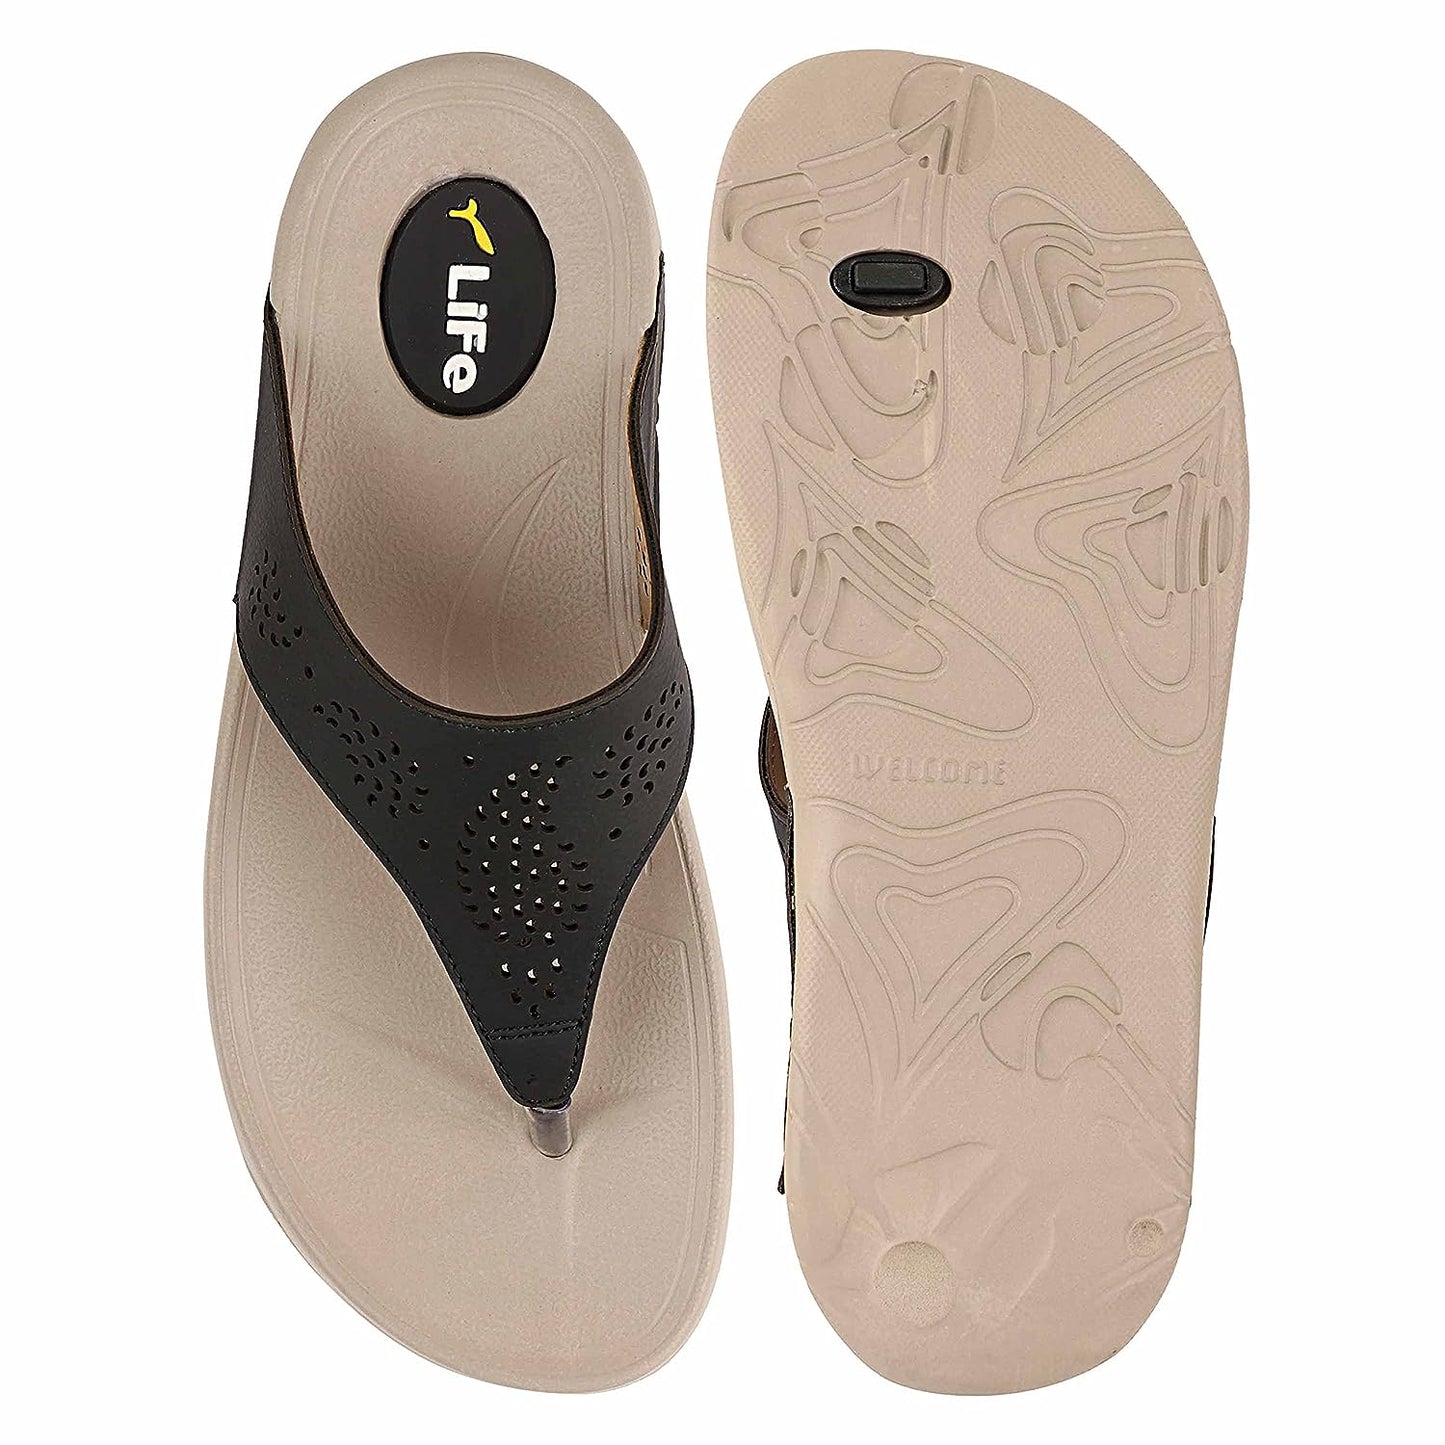 LADIES DAILY WEAR CHAPPAL Welcome